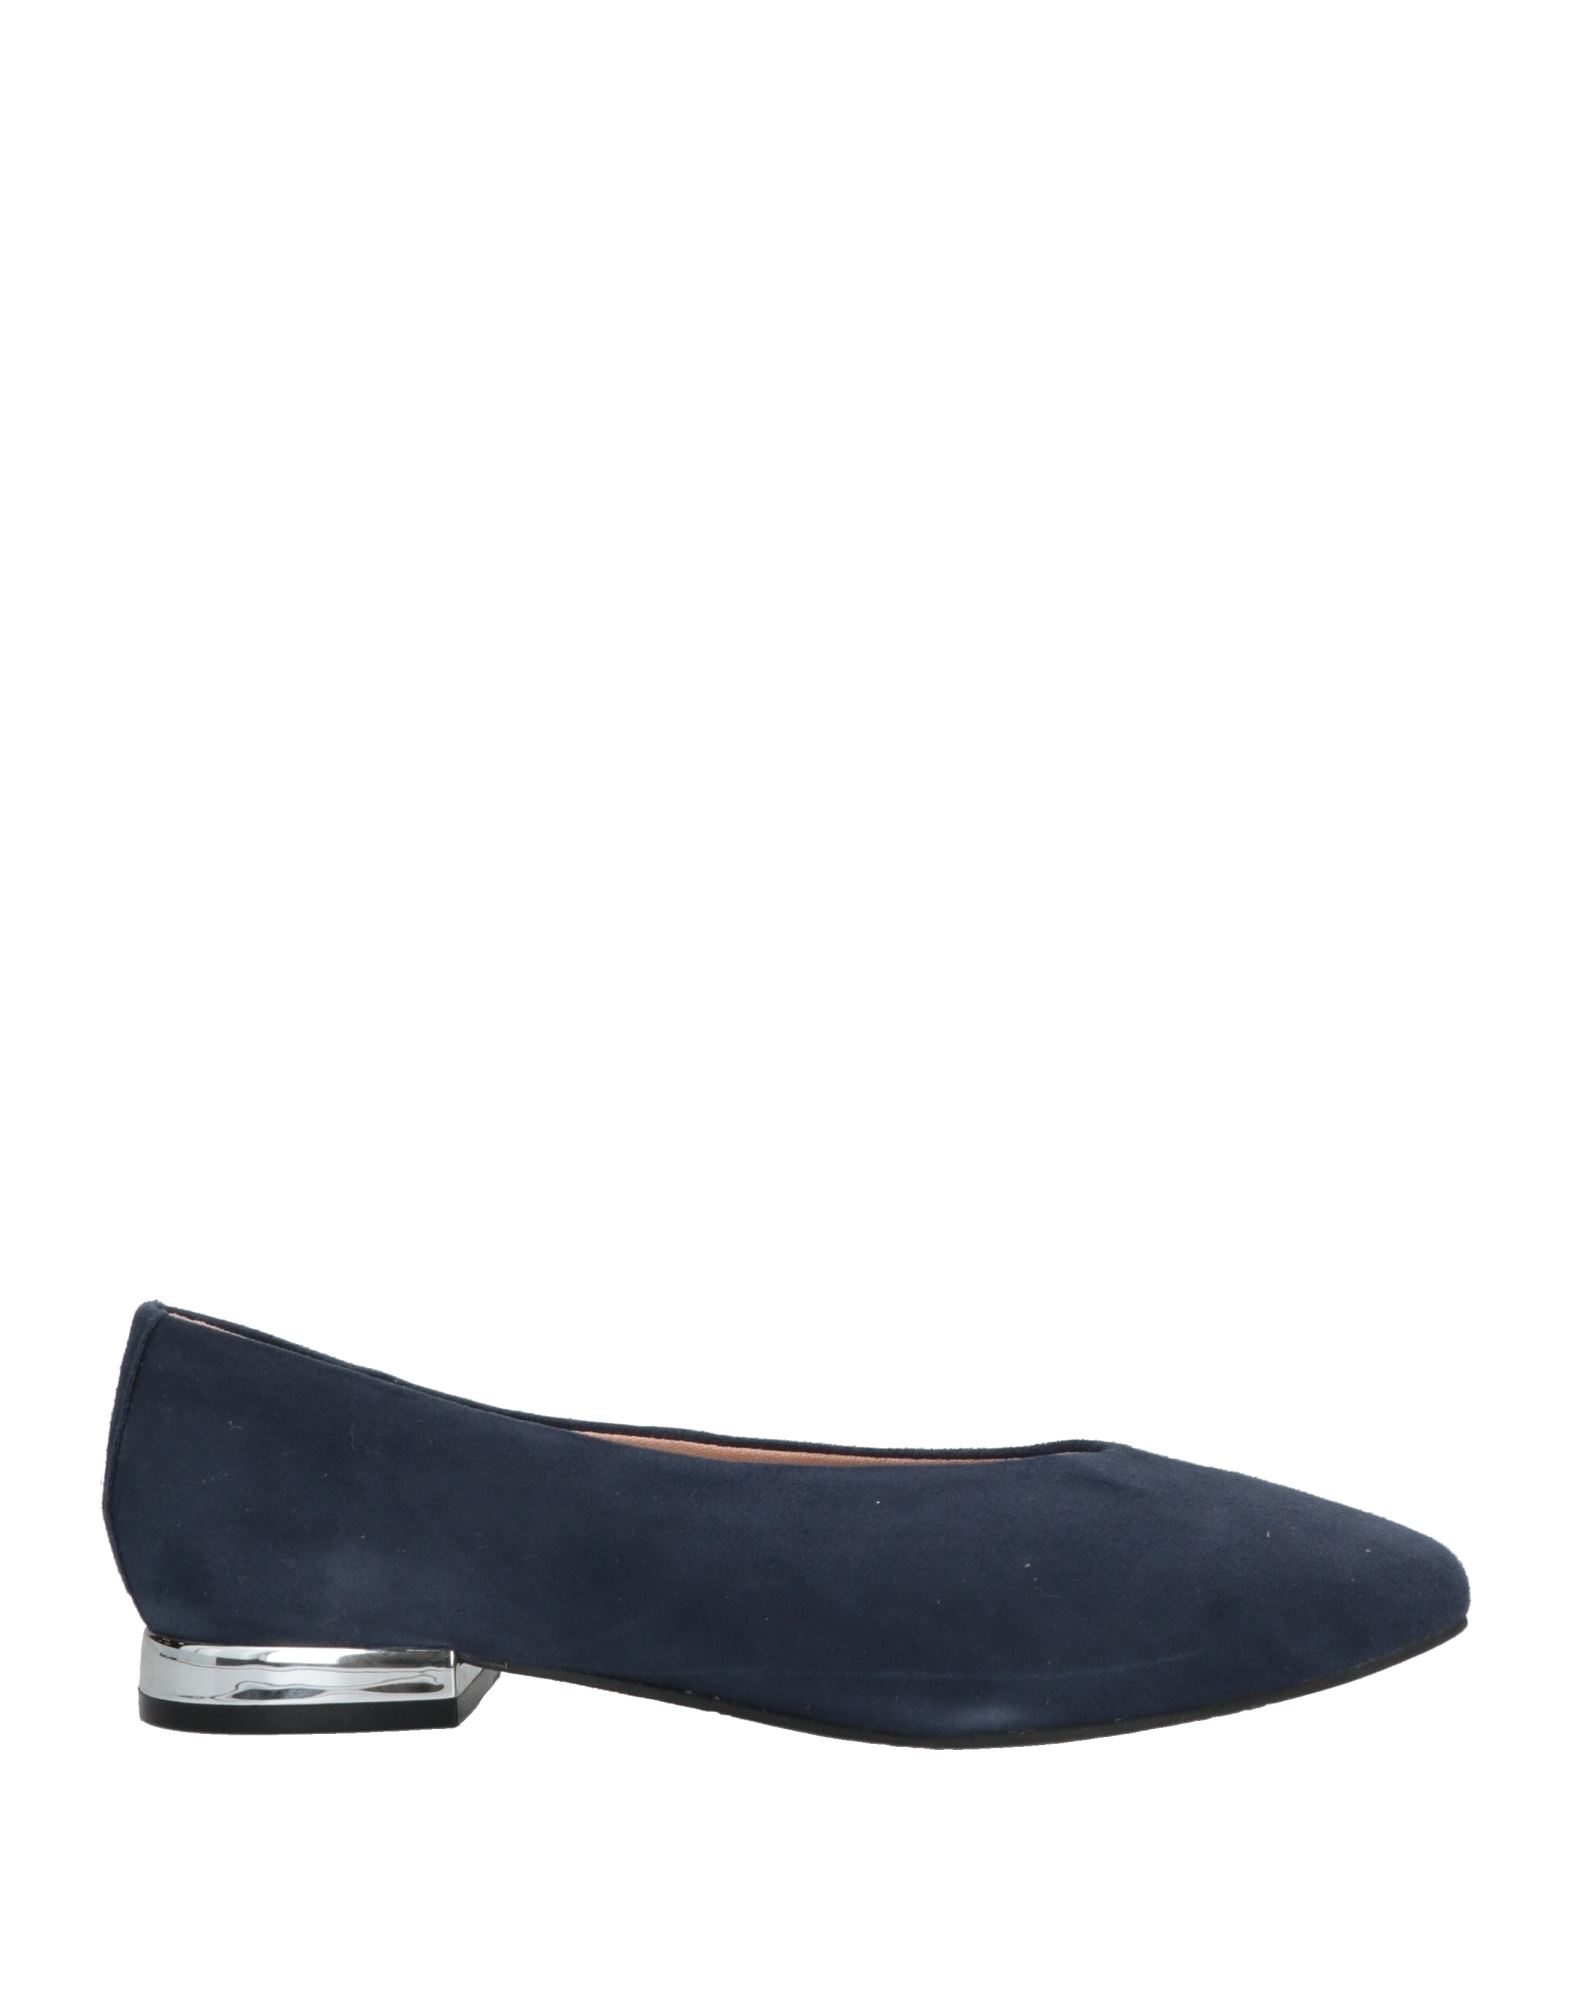 GIOSEPPO GIOSEPPO WOMAN BALLET FLATS MIDNIGHT BLUE SIZE 6.5 SOFT LEATHER